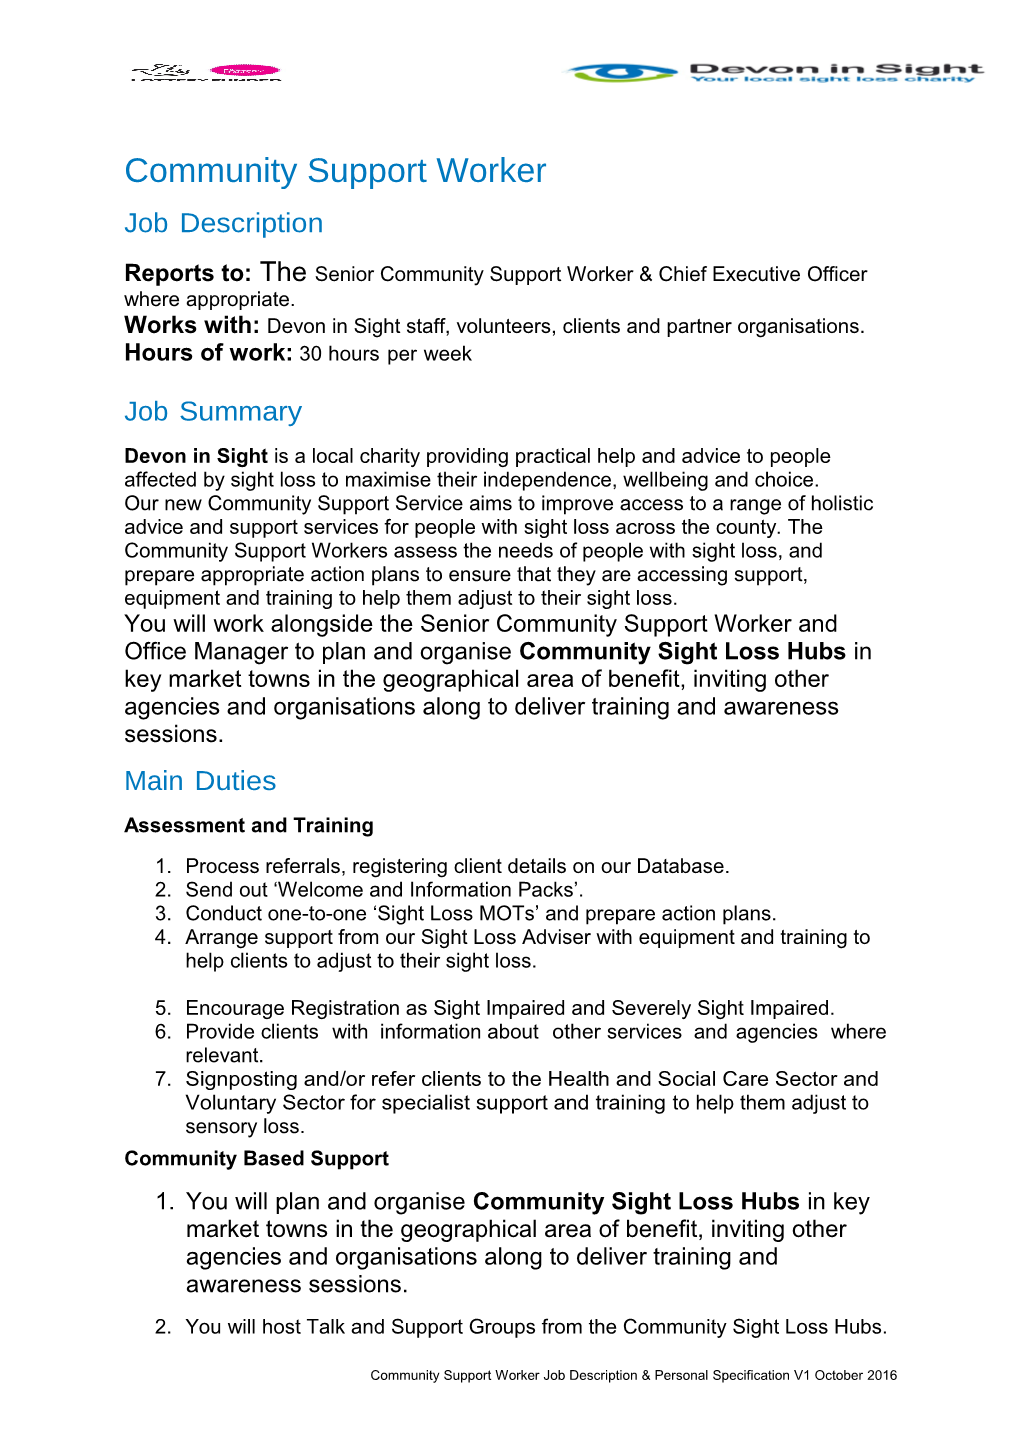 Community Support Worker